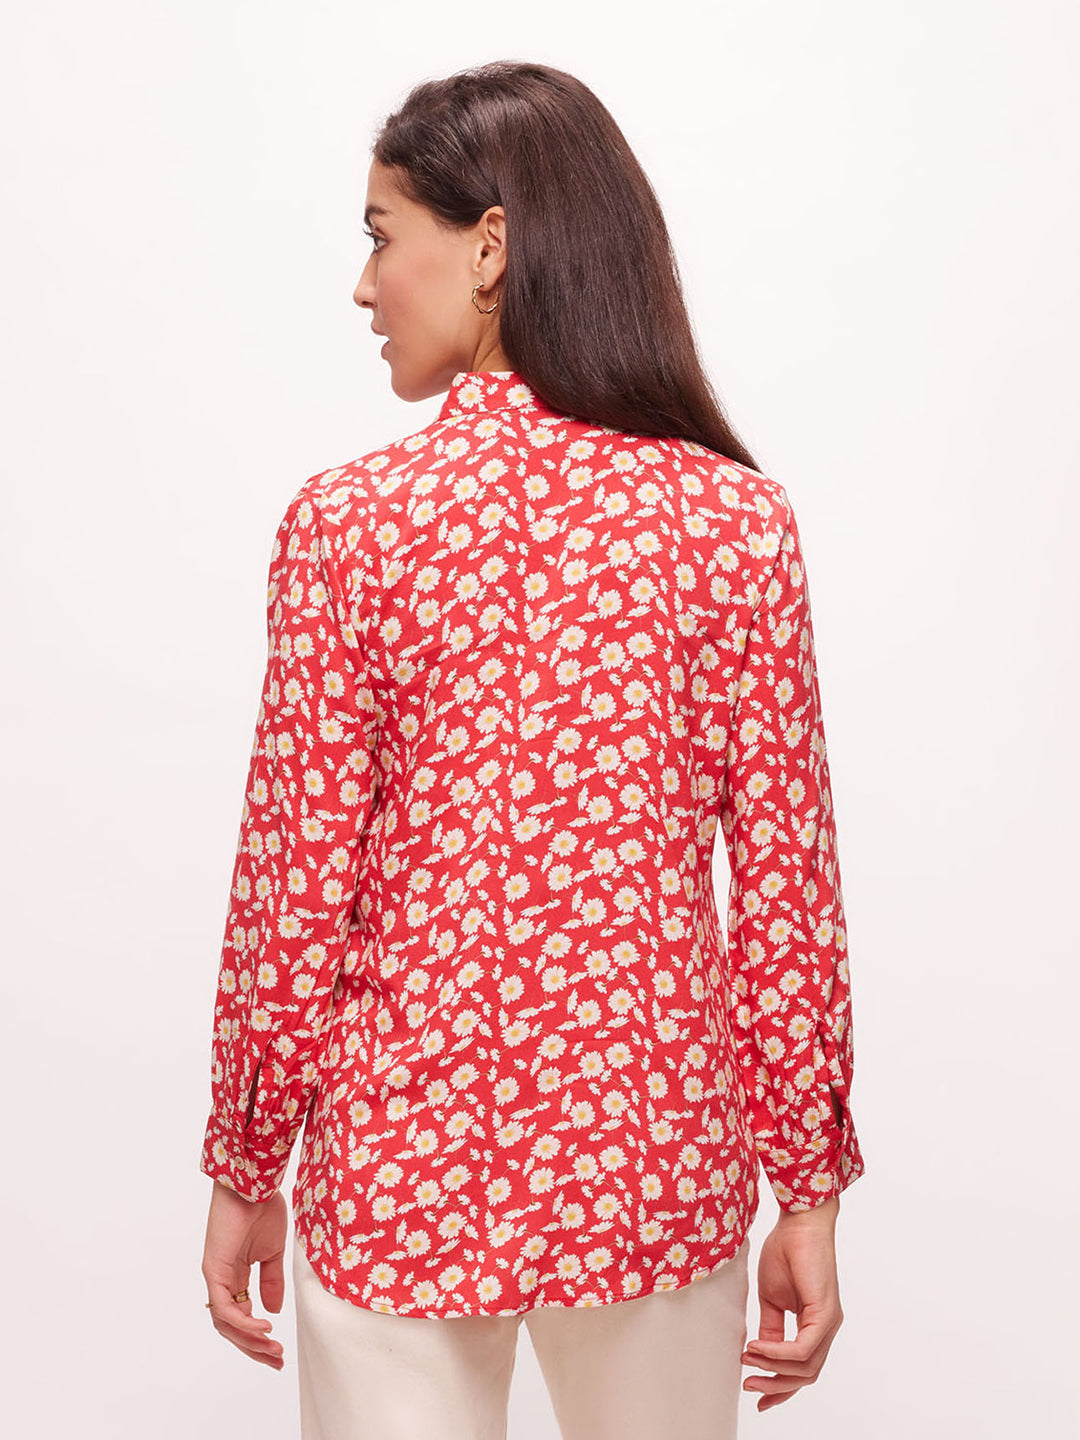 Bombay High Women's Cherry Red Full Sleeves Floral Print Relaxed Fit Shirt